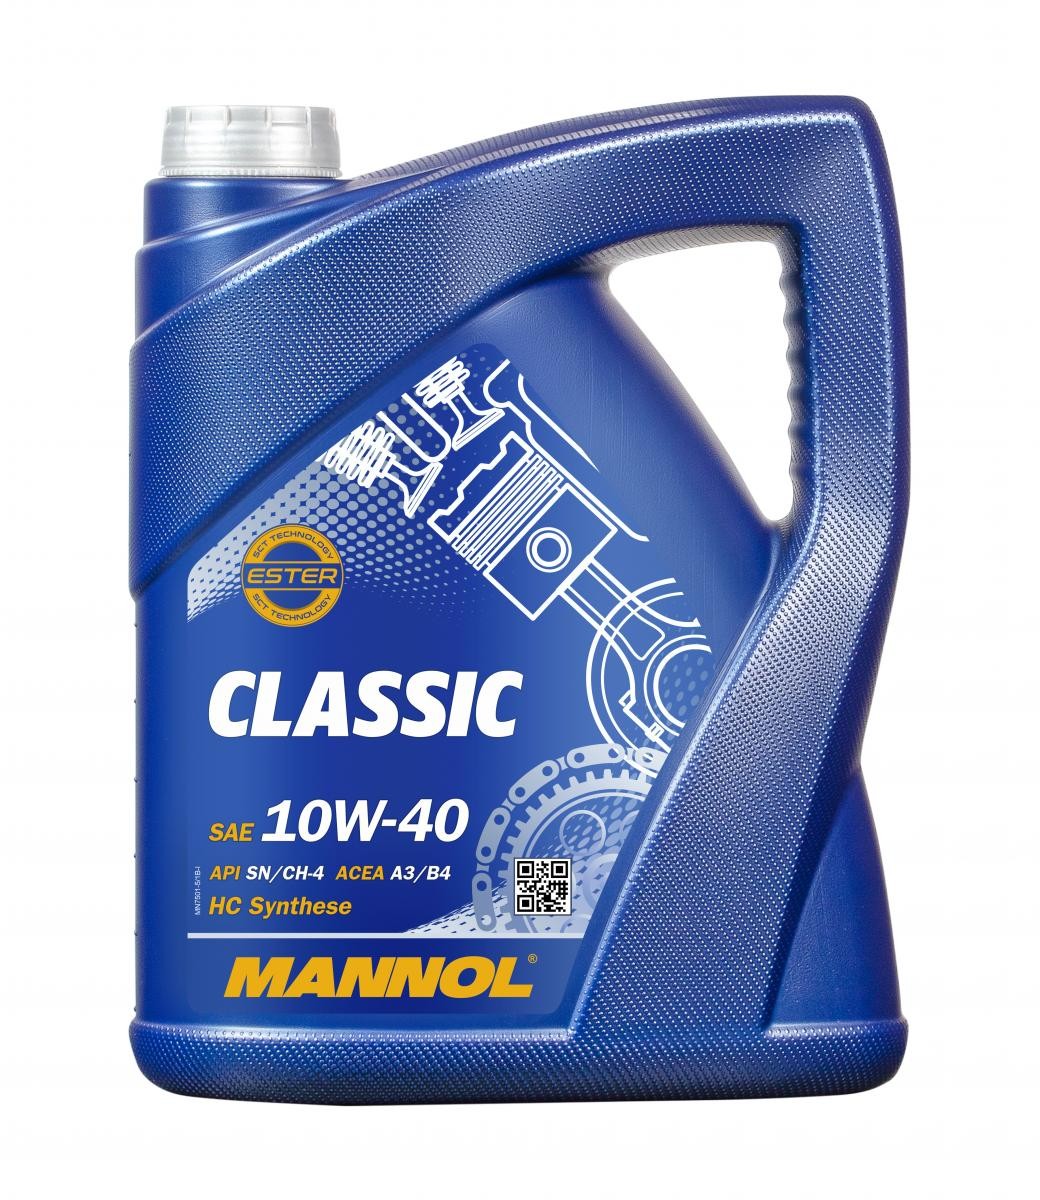 Buy Auto oil MANNOL diesel MN7501-5 ContiClassic 10W-40, 5l, Part Synthetic Oil